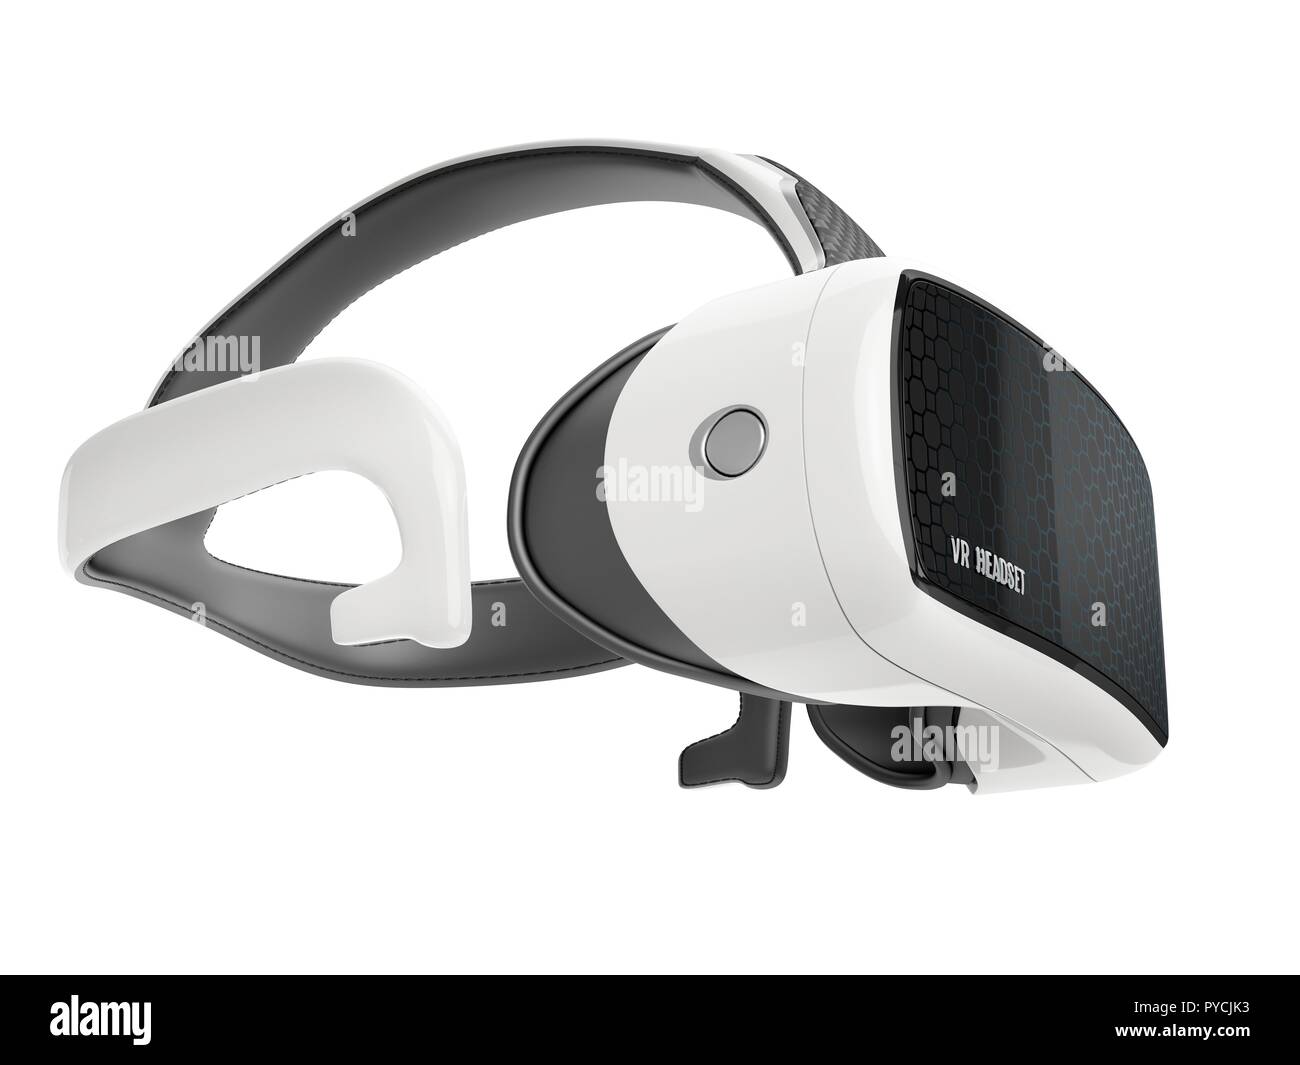 A virtual reality headset with a white and black color scheme is shown from an angle on a white background.